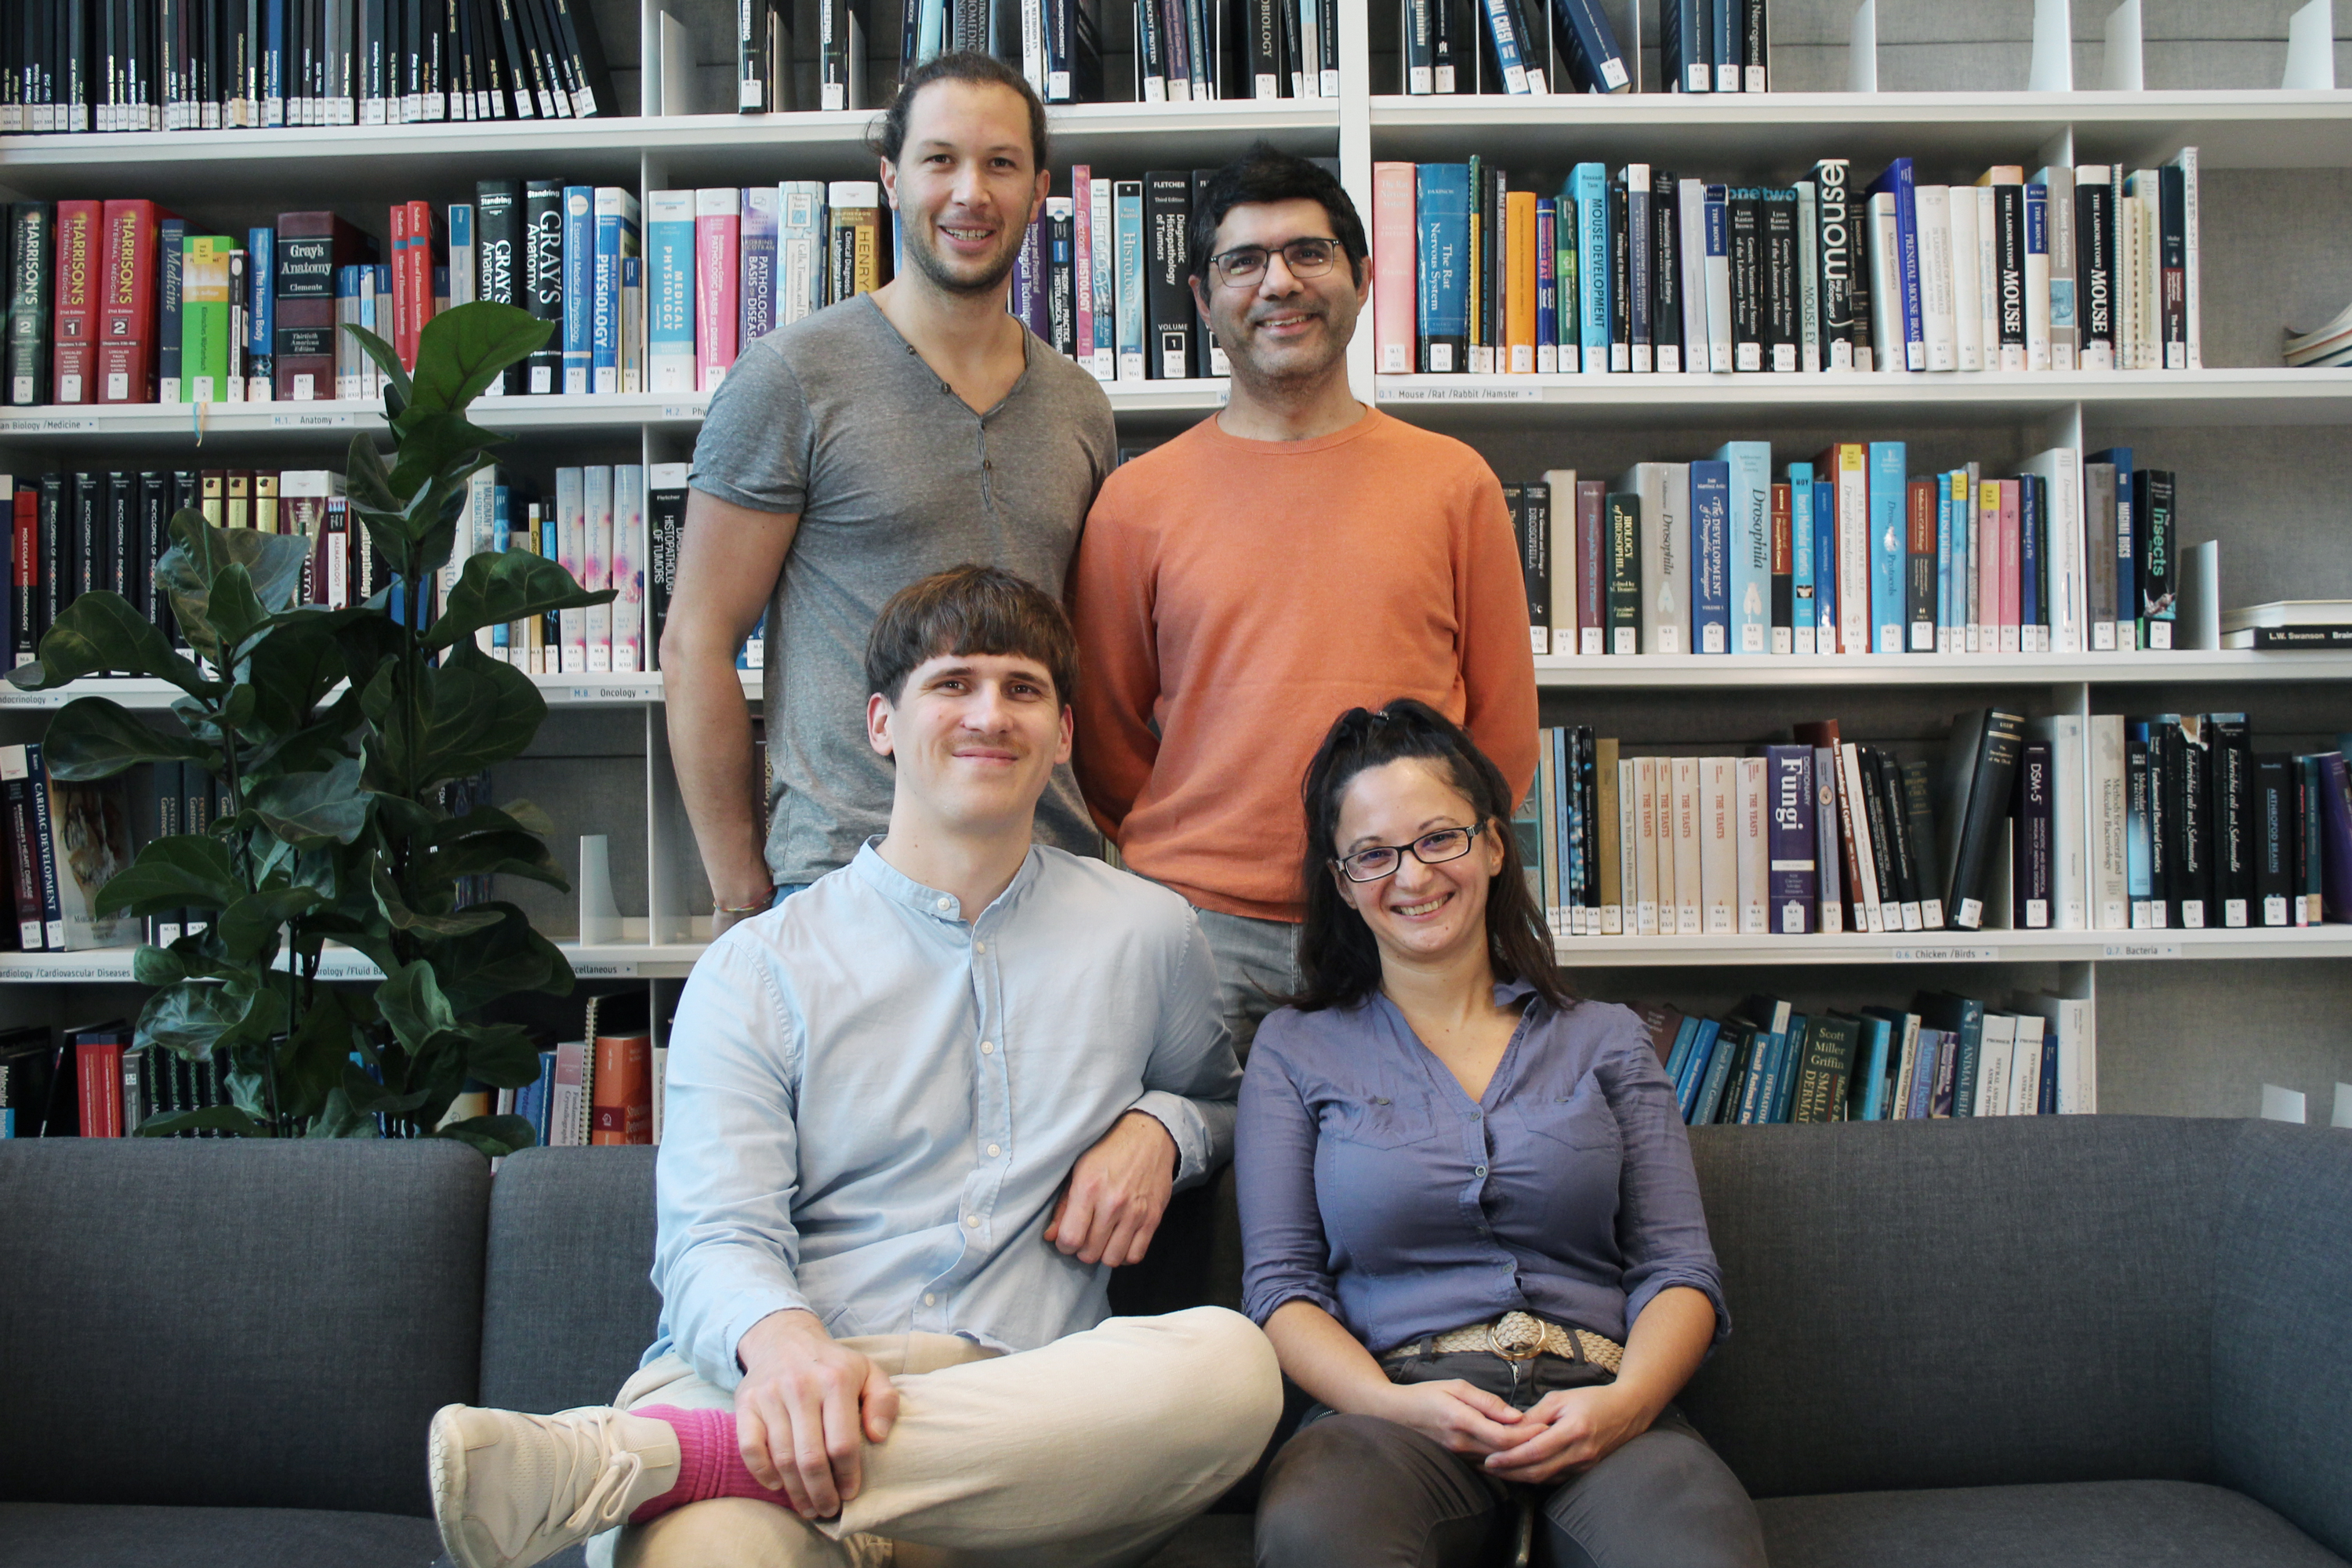 Four people in two rows, two sitting on a couch and two standing behind them, smiling at the camera. Behind them is a massive bookshelf.